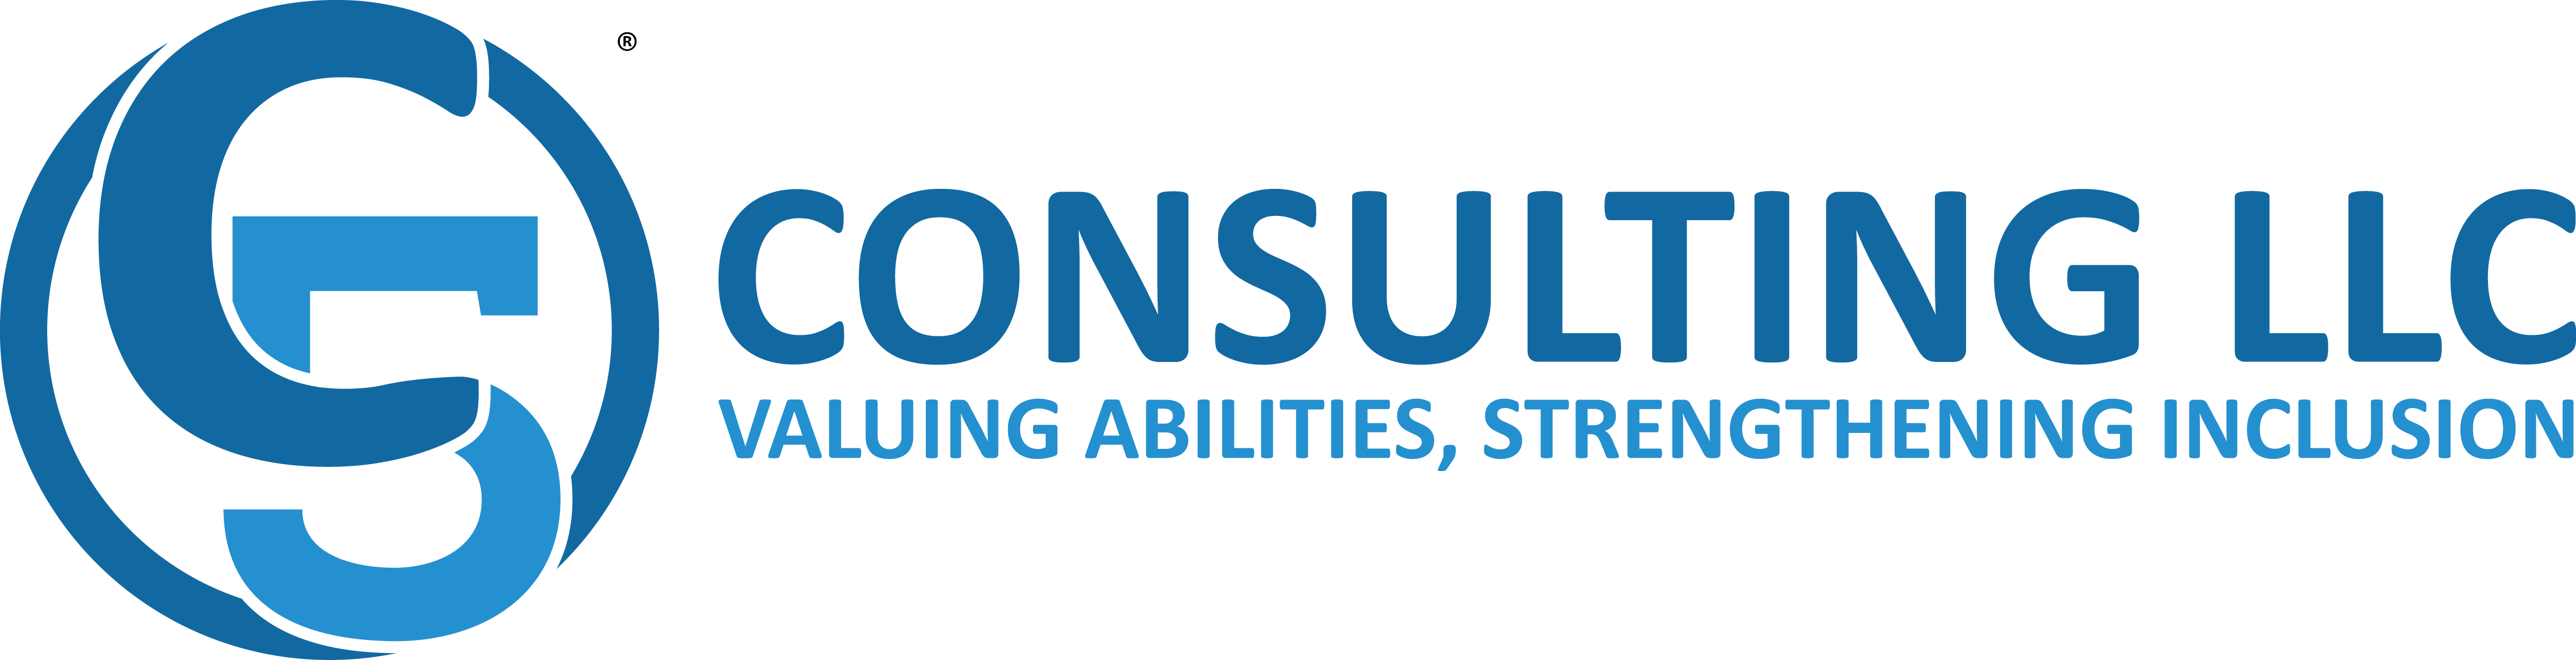 C5 Consulting LLC Valuing Abilities, Strengthening Inclusion